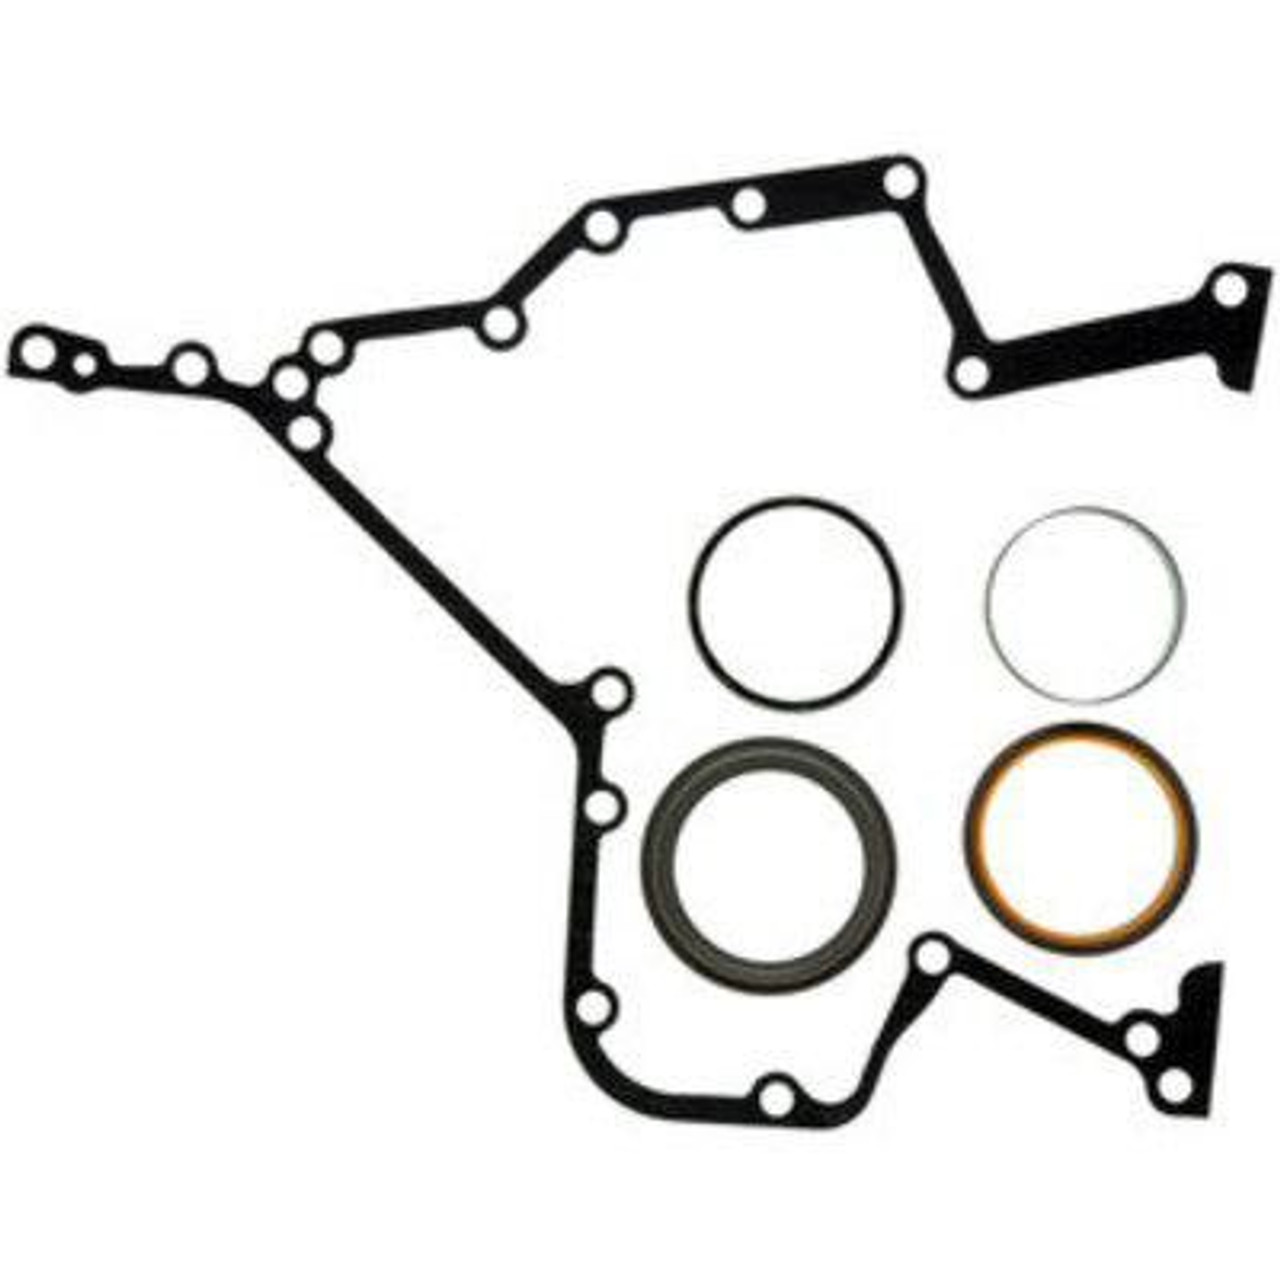 Mahle Timing Cover Gasket Kit 1998.5 to 2002 5.9L Cummins (MCIJV5097)-Main View